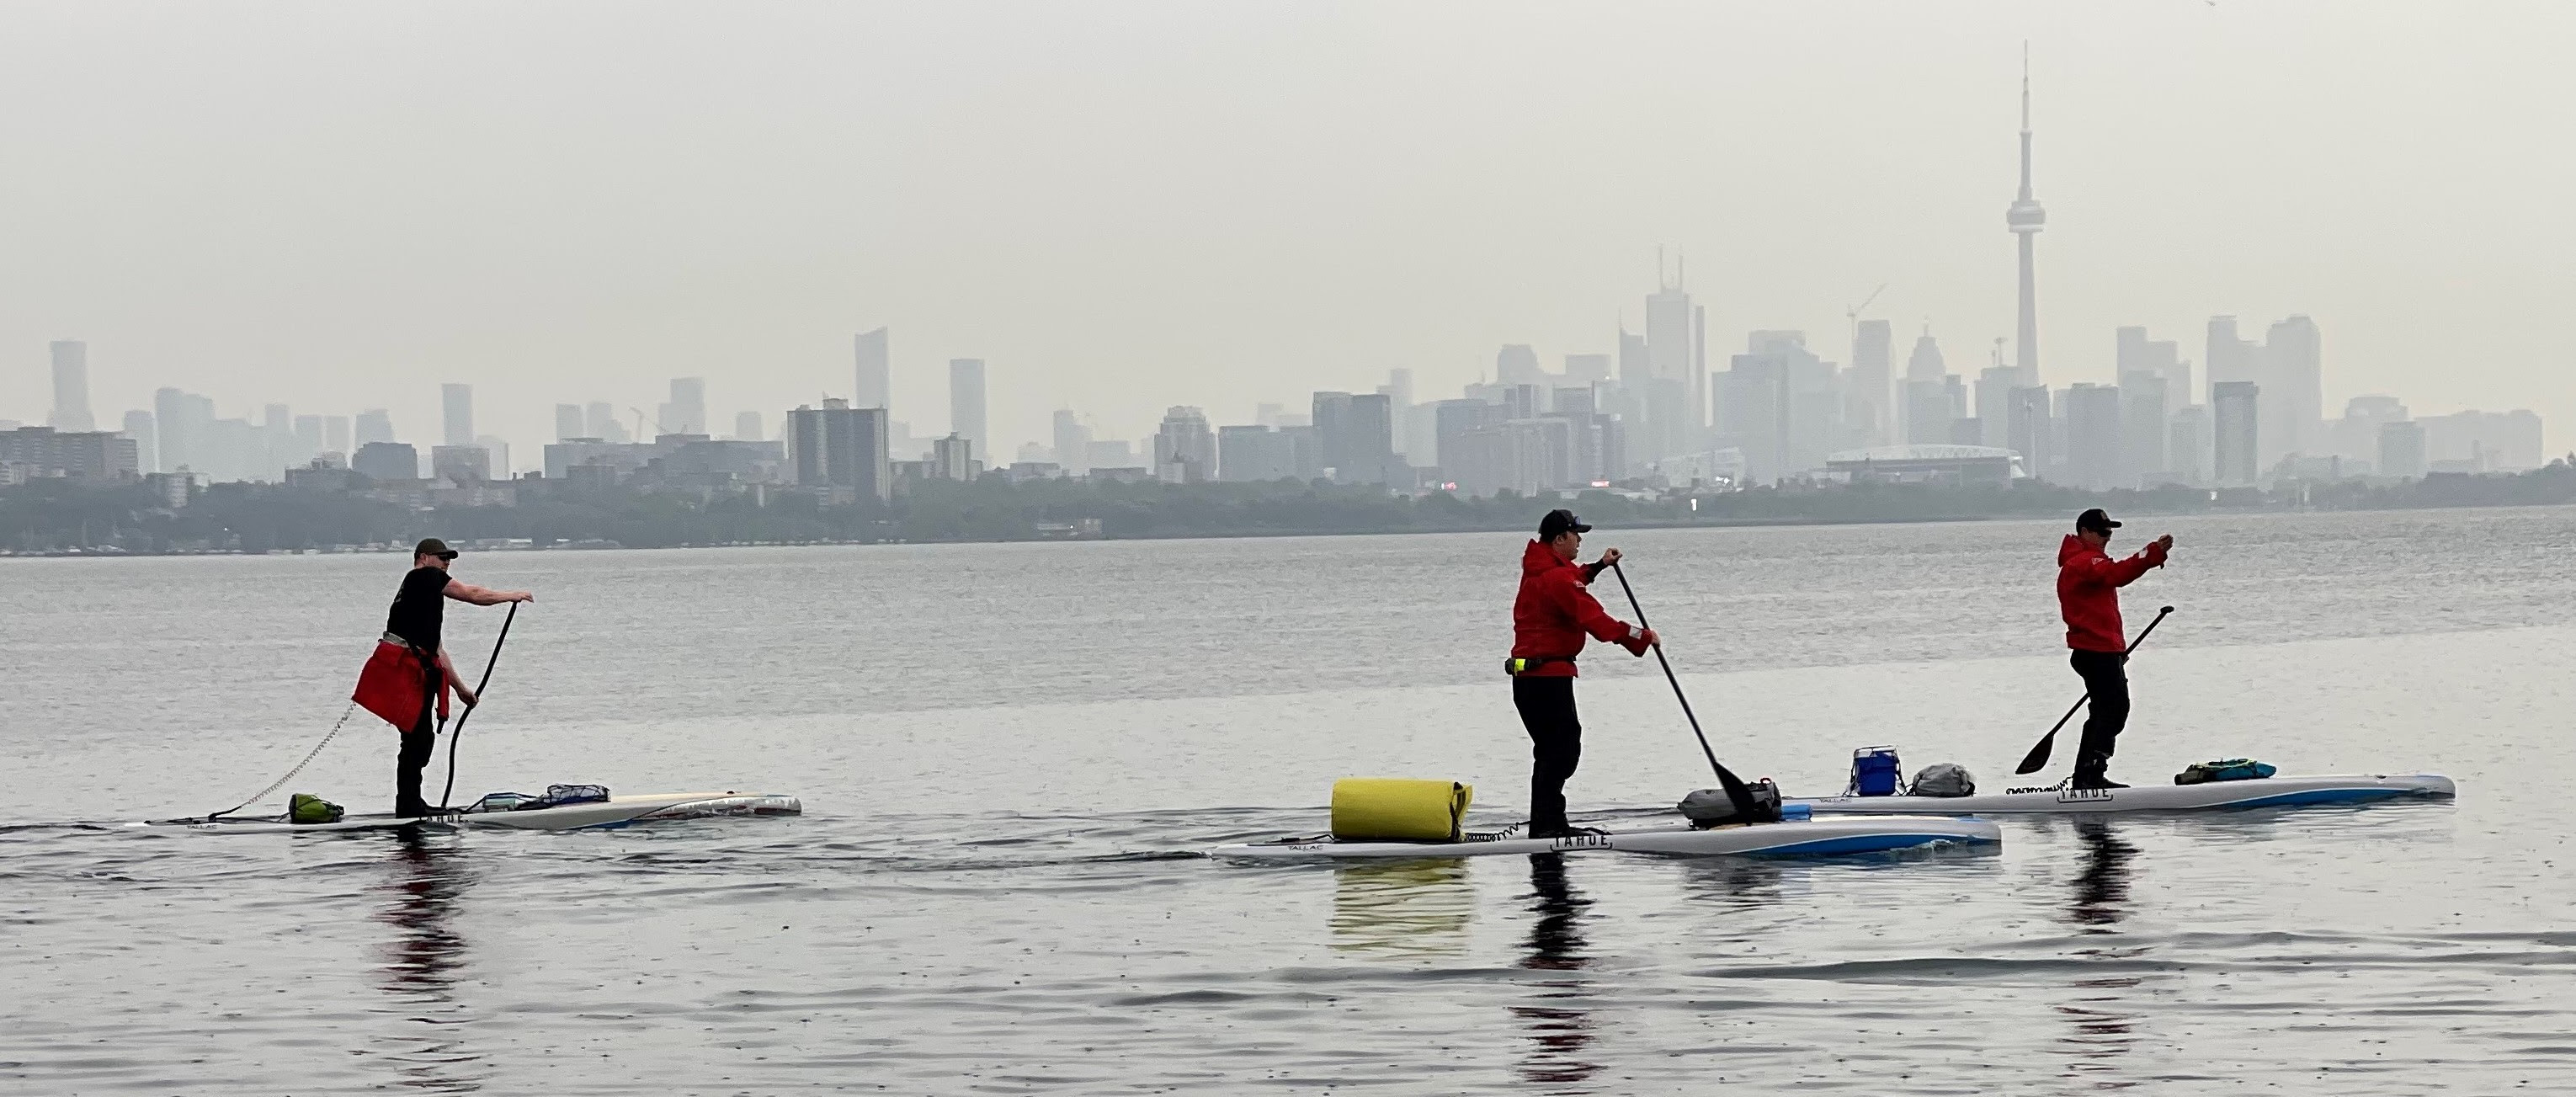 Three men on standup paddleboards with Toronto skyline in background.